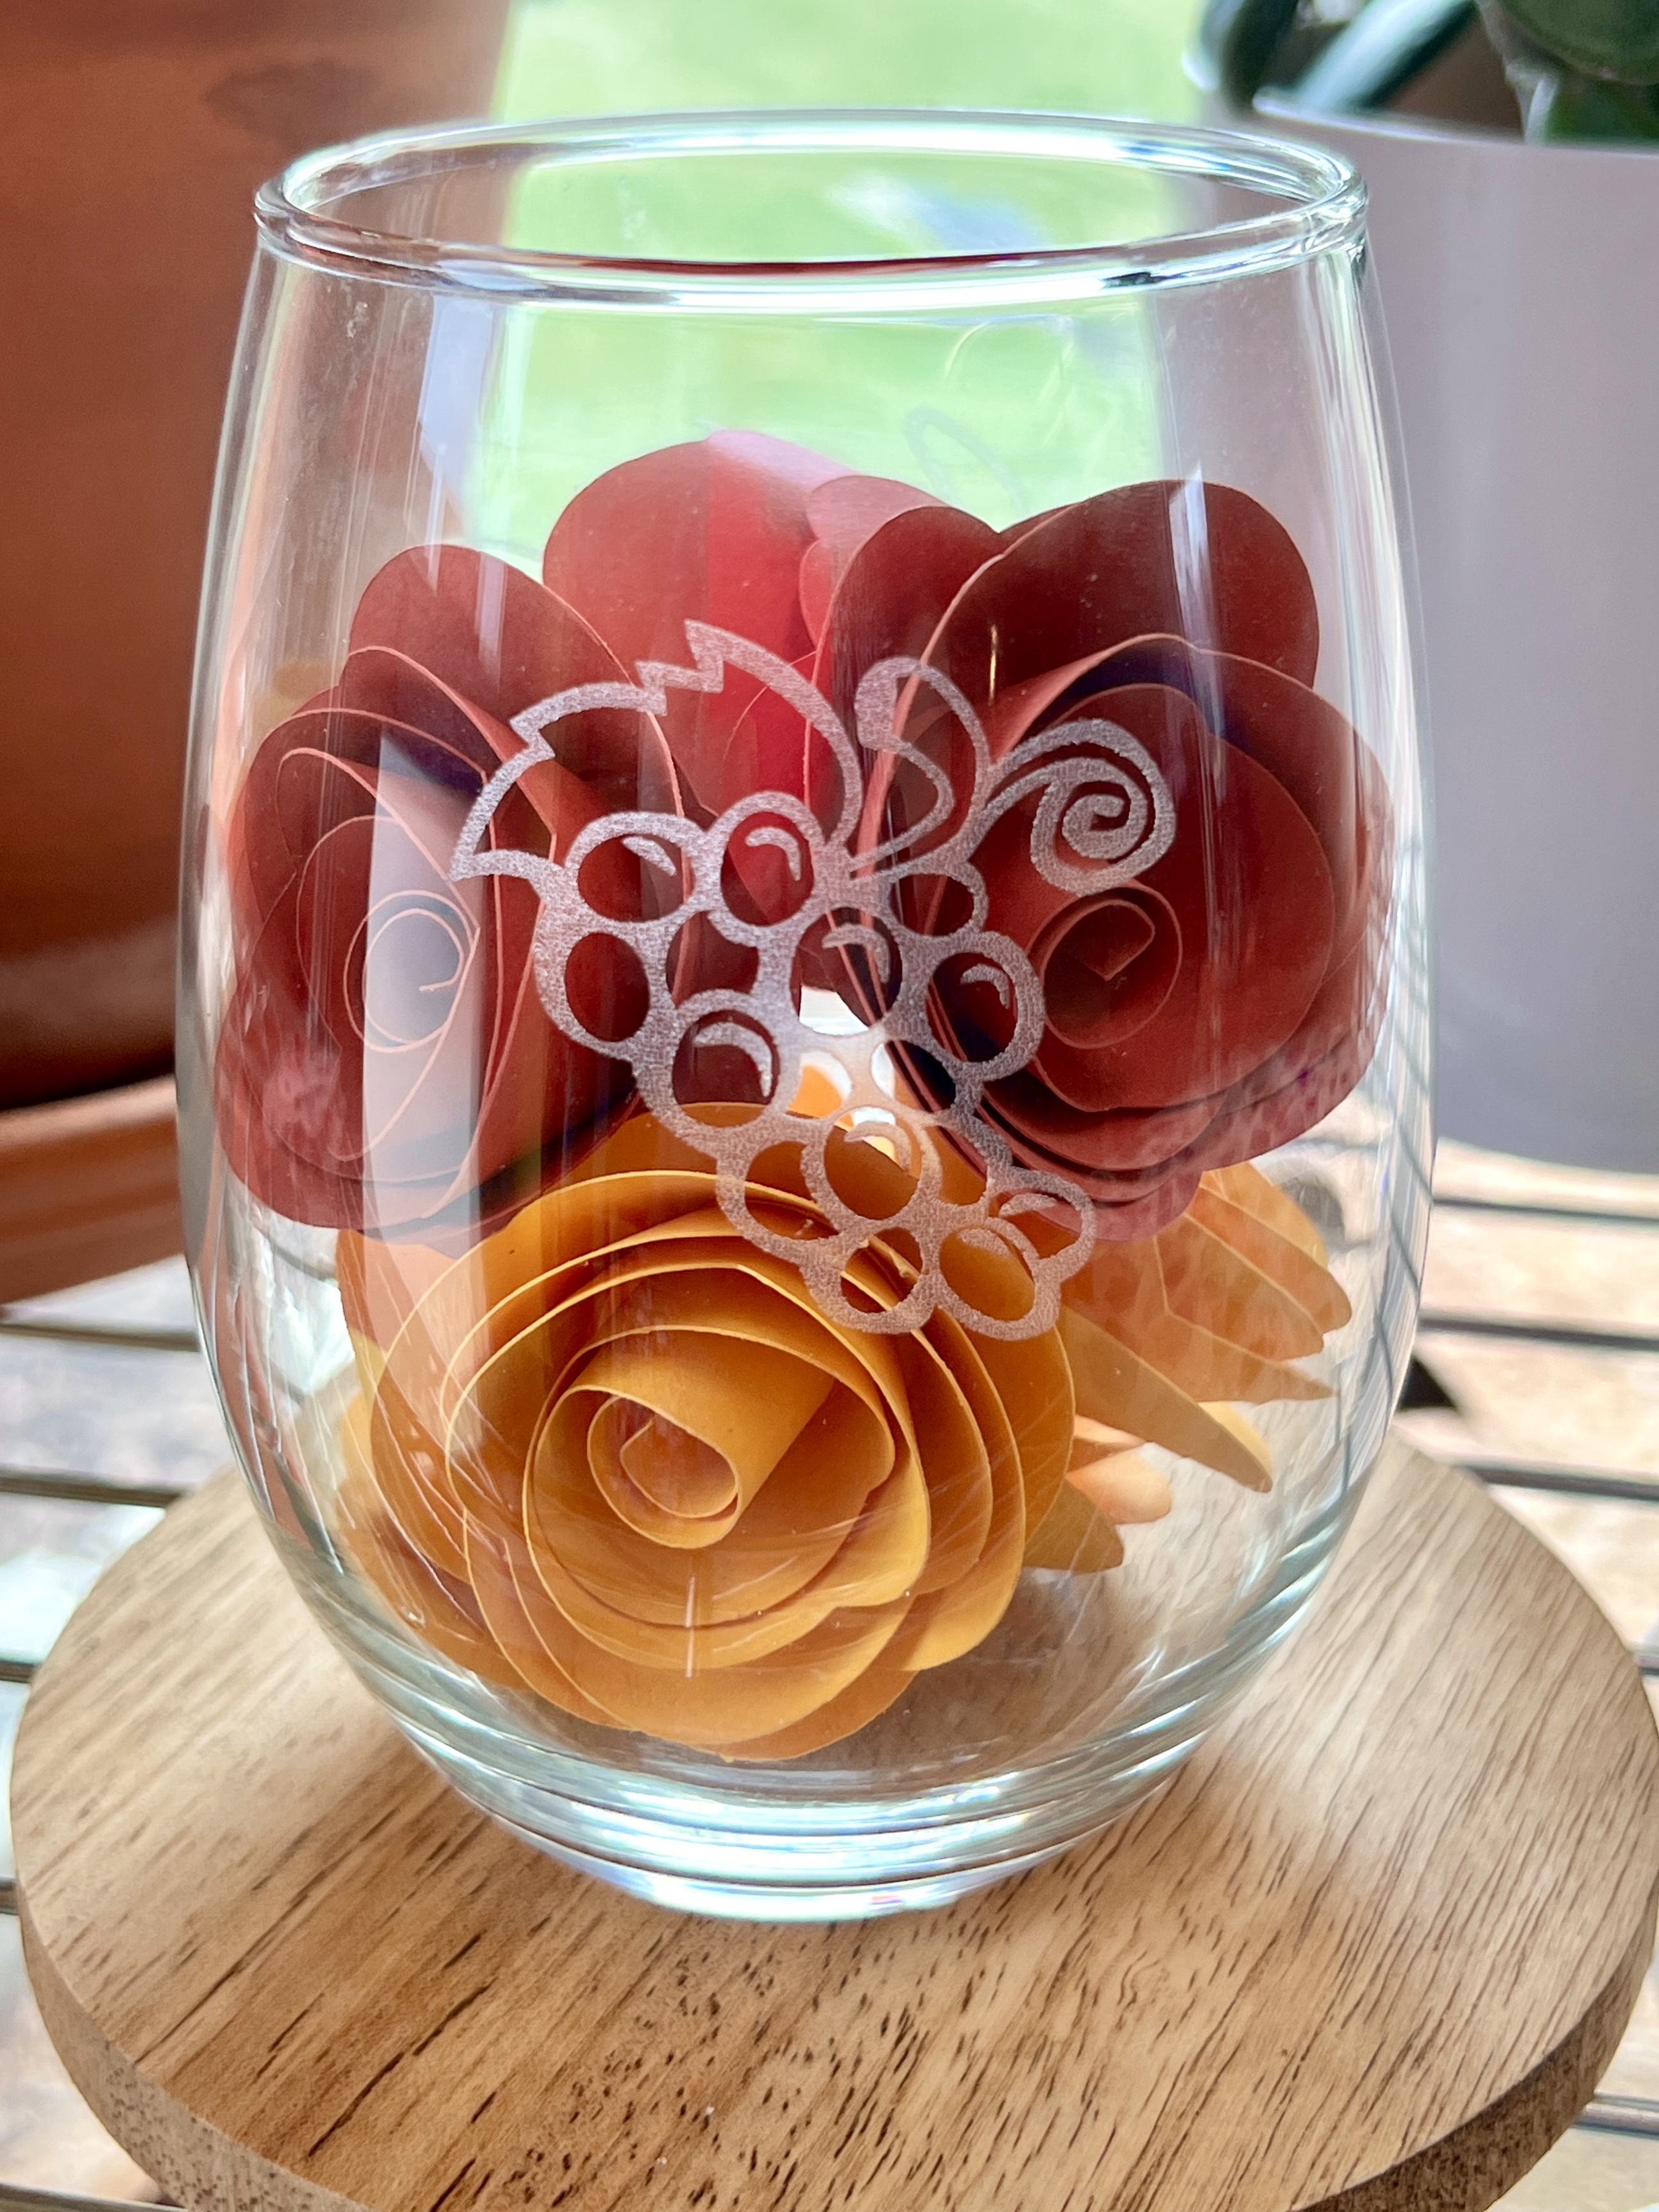 Glass tumbler with grapes etched into the glass. Glass is filled with yellow and red paper flowers.